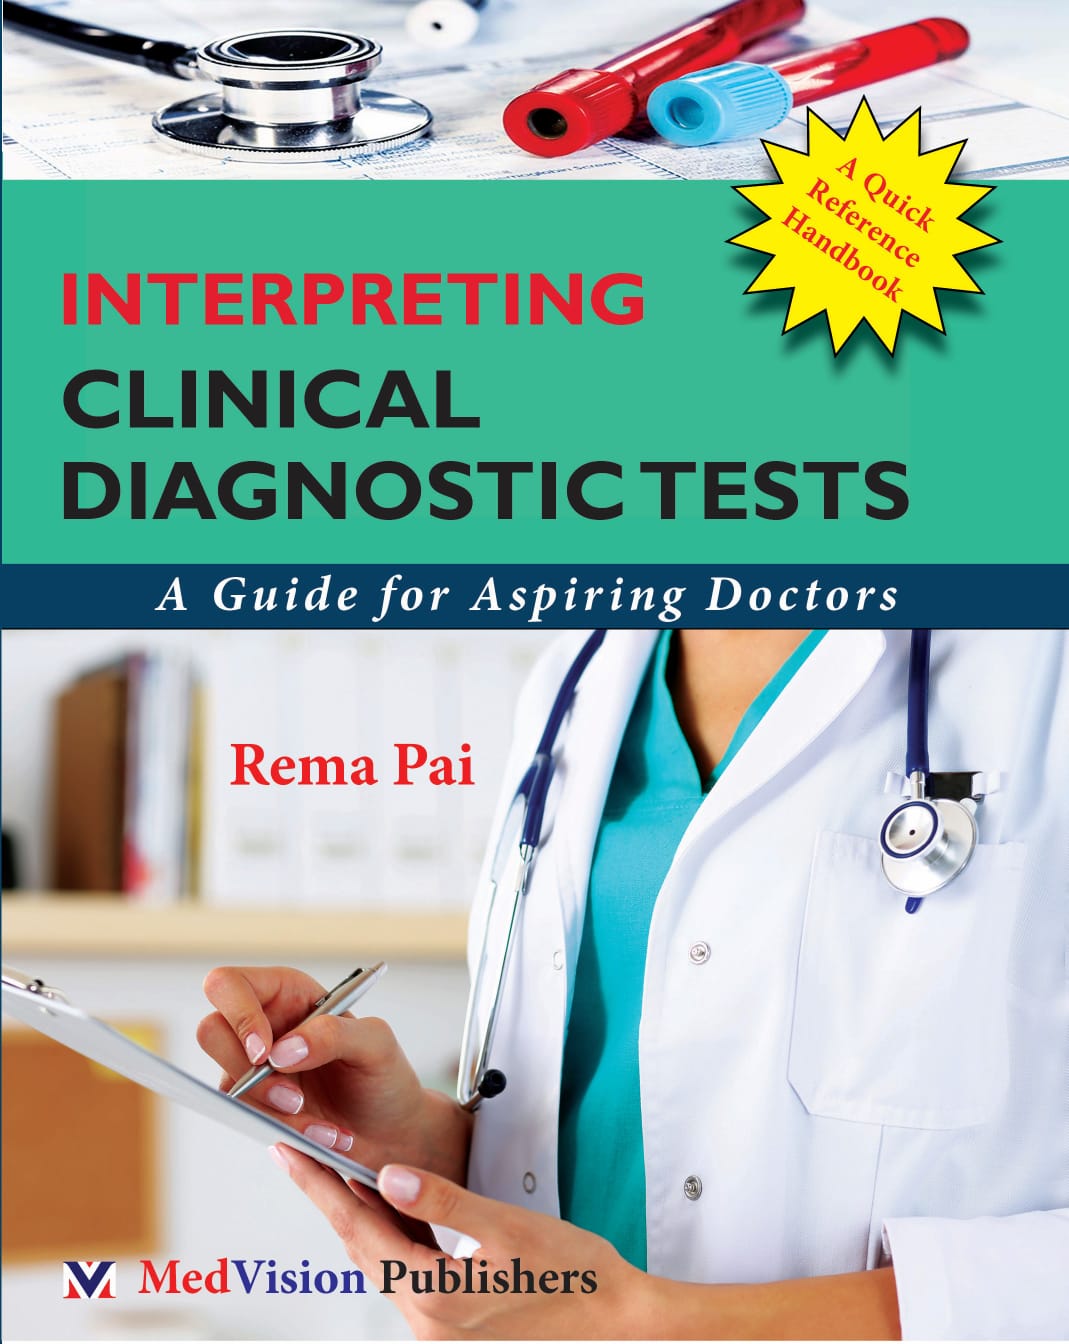 INTERPRETING CLINICAL DIAGNOSTIC TESTS (A guide for aspiring doctors) BY REMA PAI